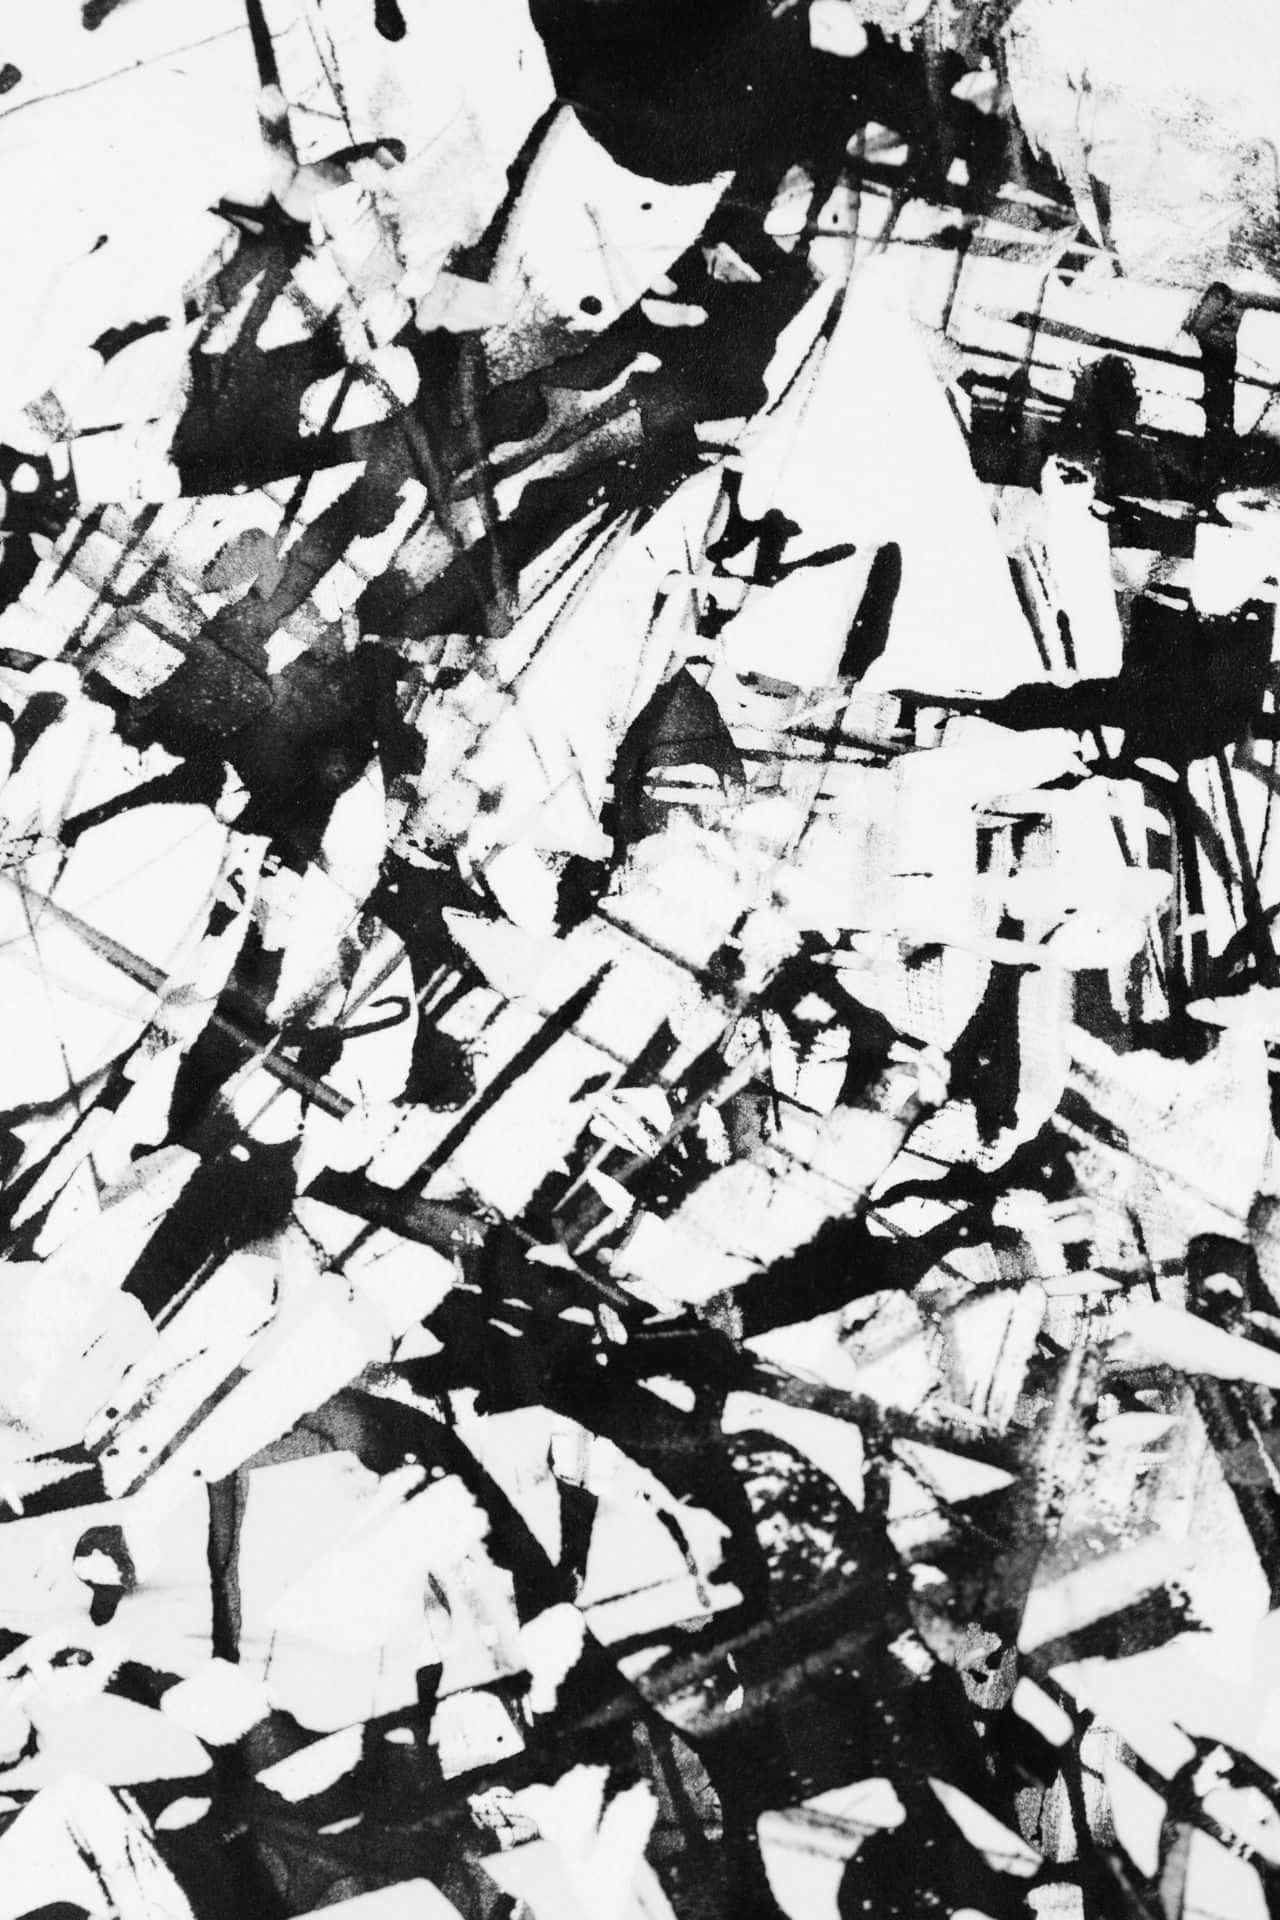 Black And White Abstract Art 1280 X 1920 Wallpaper Wallpaper